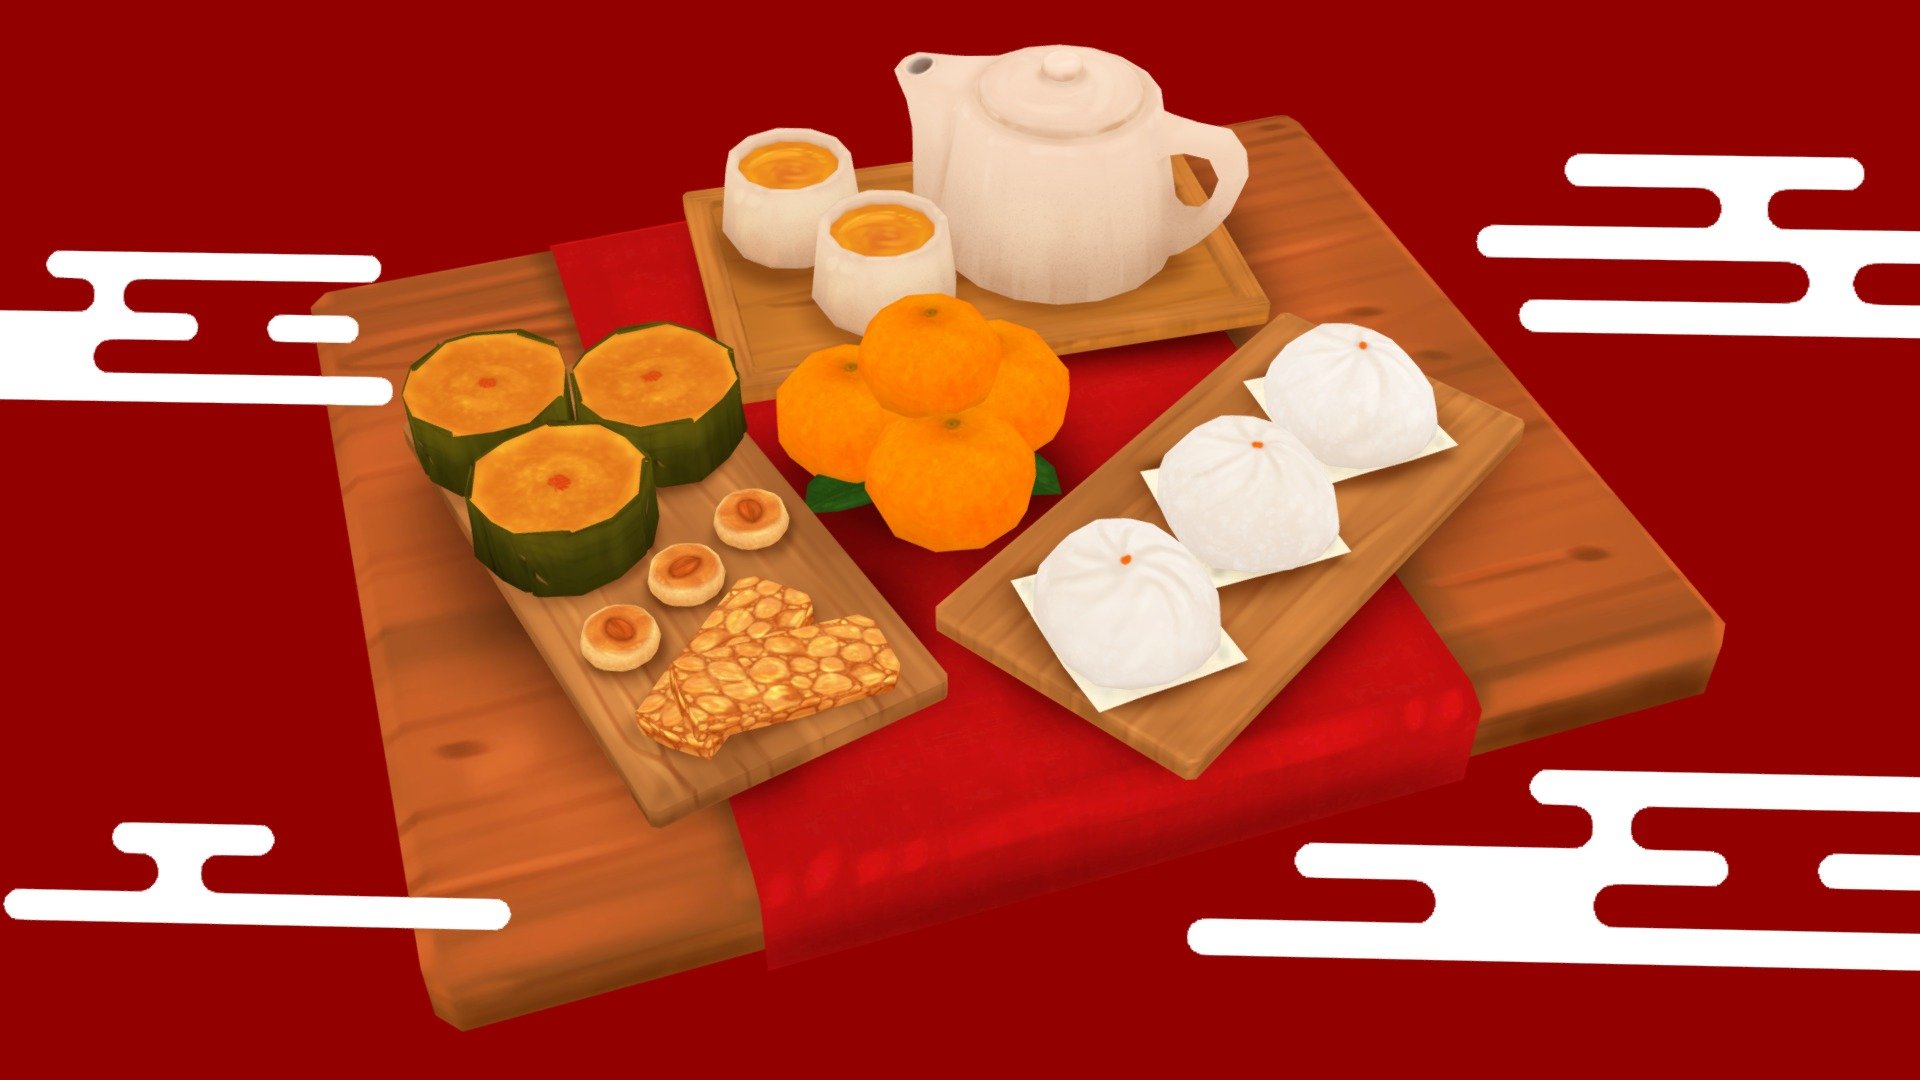 Gong Xi Fa Cai!! Lunar new year comes again!!. Here's a tea set with some Chinese new year snacks.



Low poly &amp; Hand-painted

Modelling in Blender

Texture Painting in Substance Painter

twitter : @notRealSalmon - Lunar New Year Tea with Snacks - 3D model by siriwakon 3d model